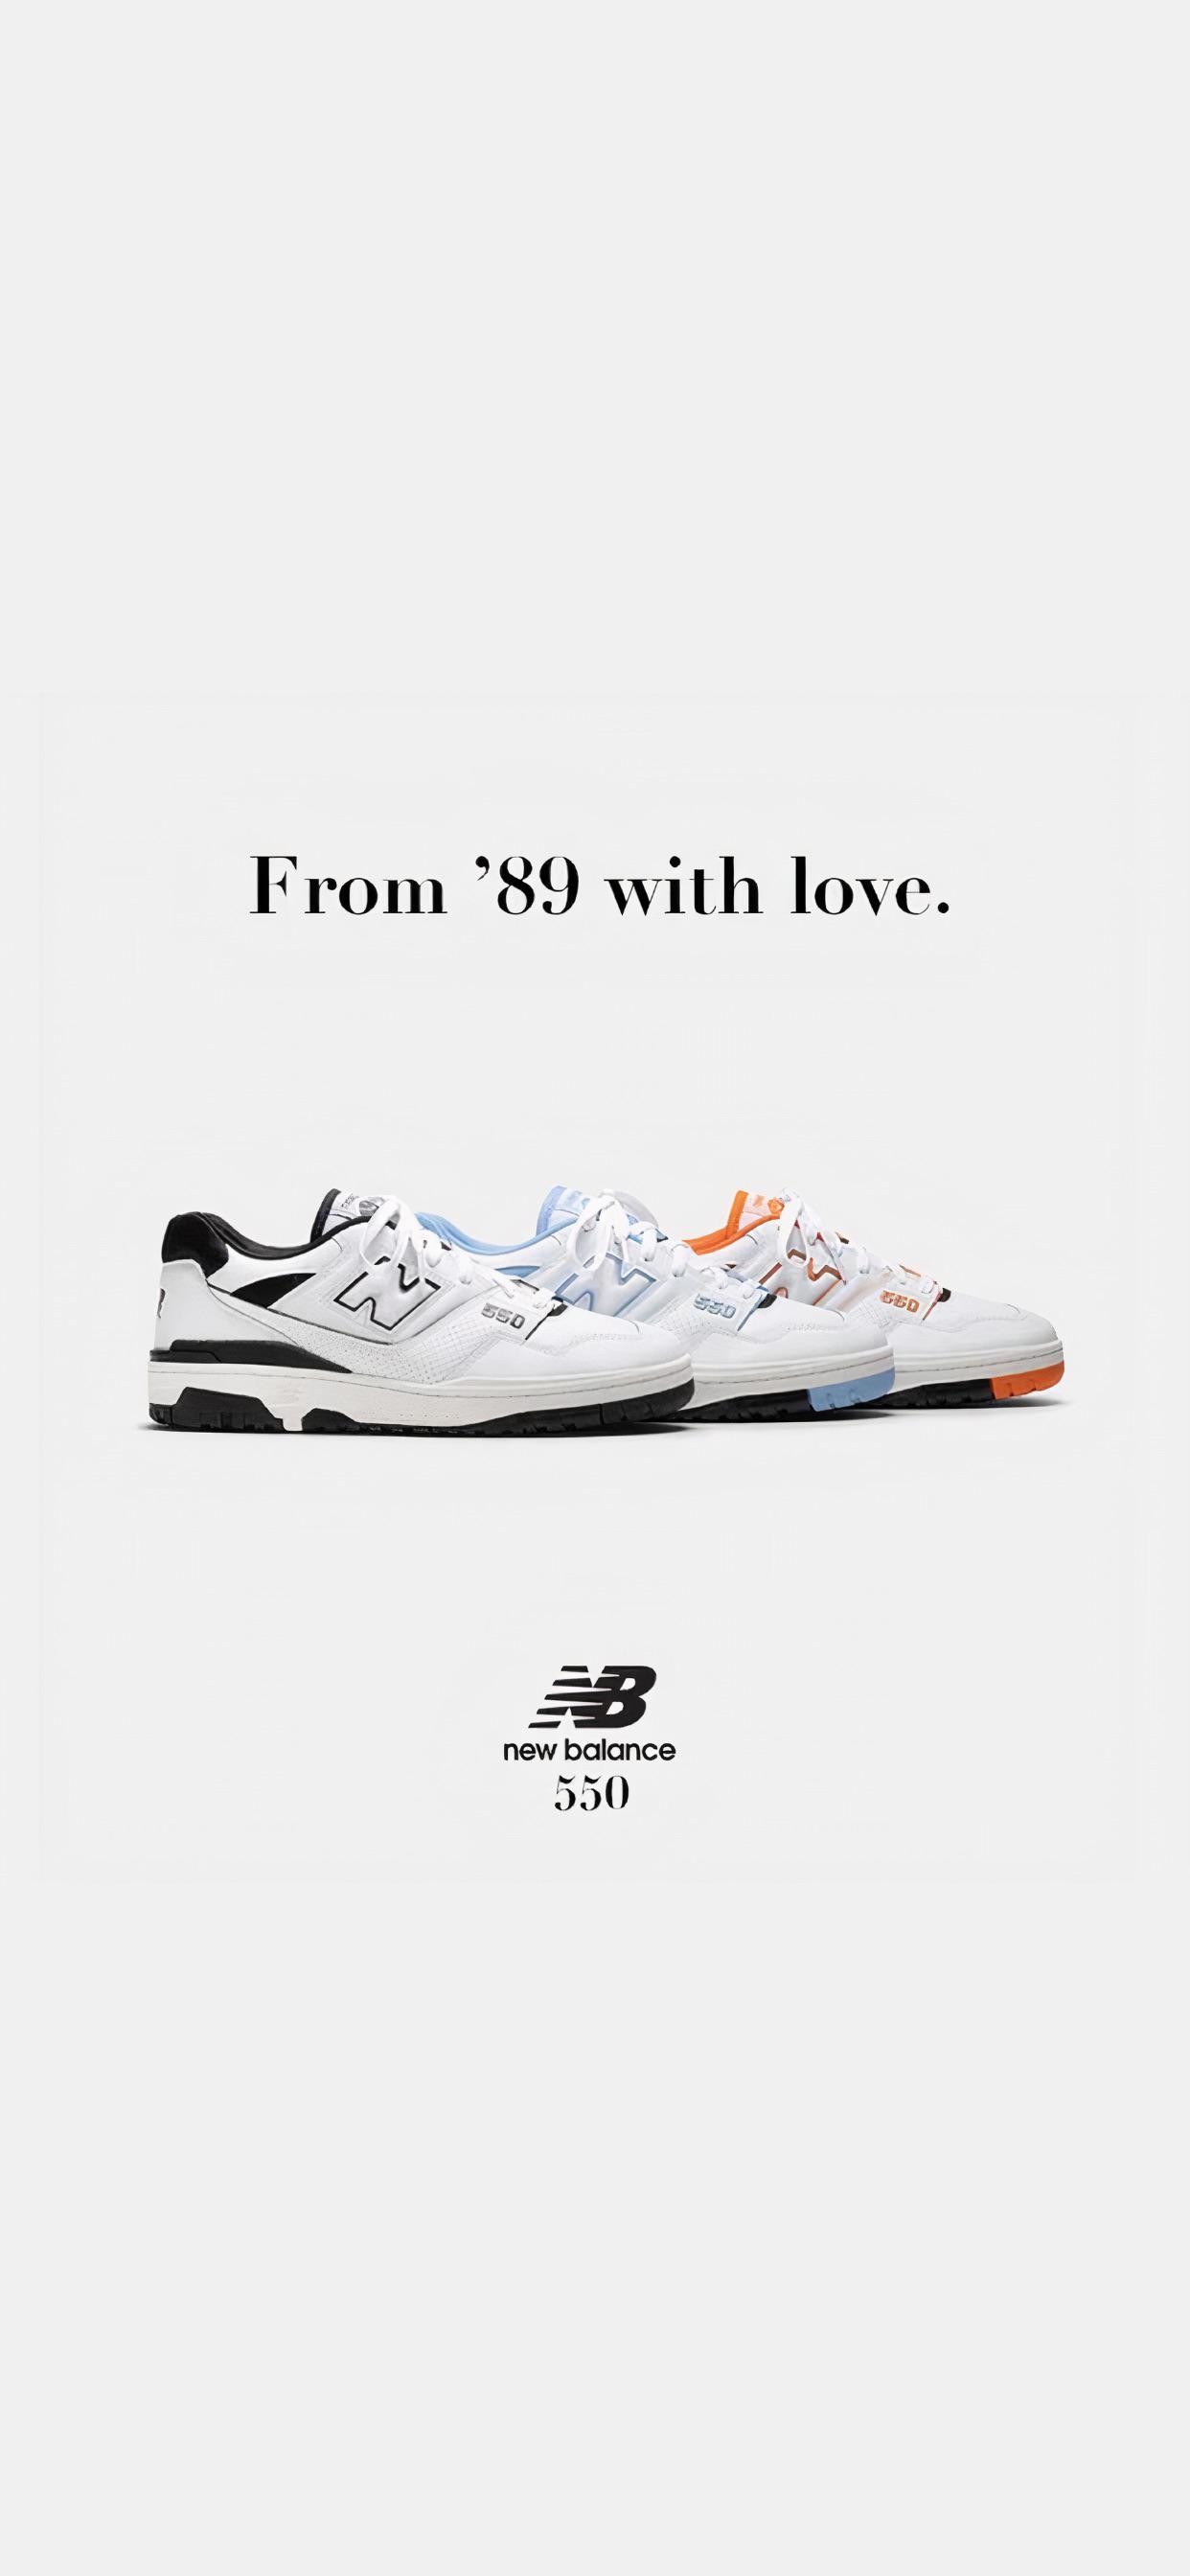 From '89 with love. - New Balance